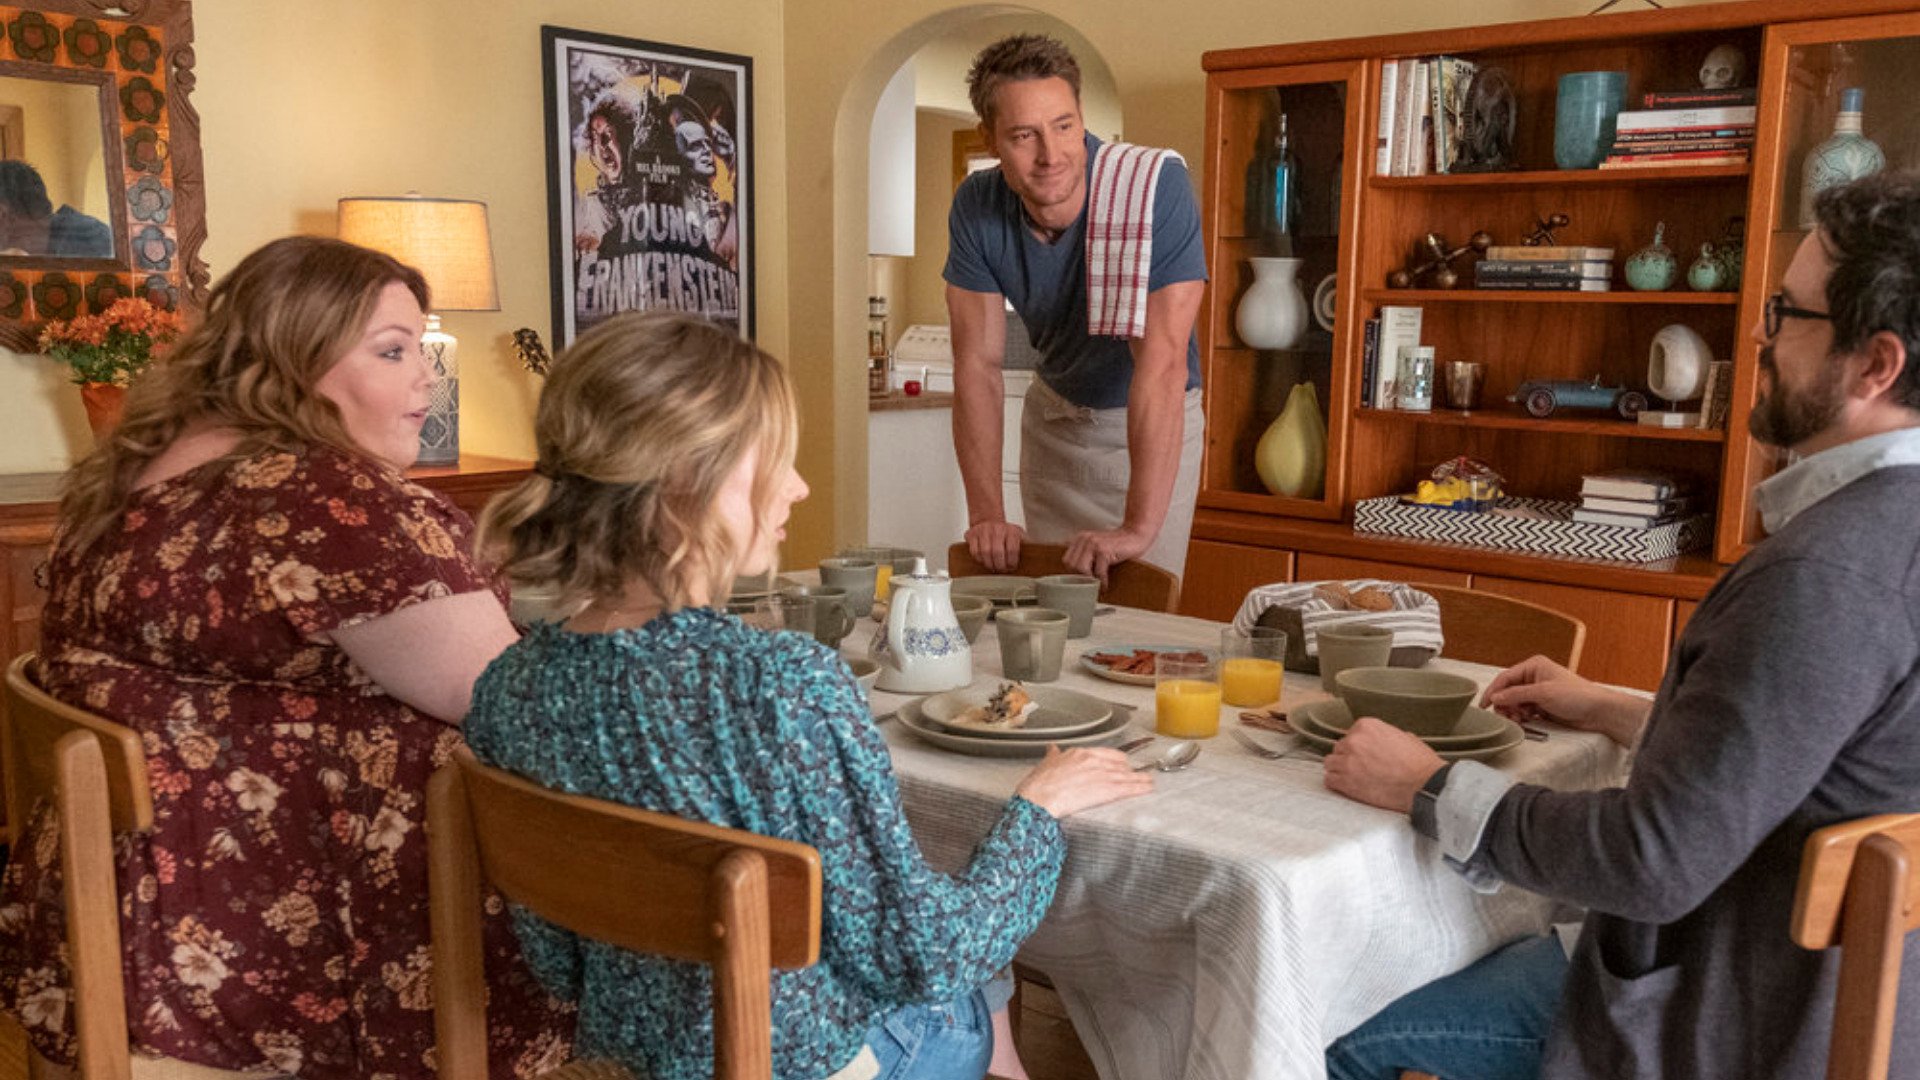 Justin Hartley as Kevin, Chrissy Metz as Kate, Caitlin Thompson as Madison, and Adam Korson as Elijah have breakfast together in ‘This Is Us’ Season 6 Episode 6